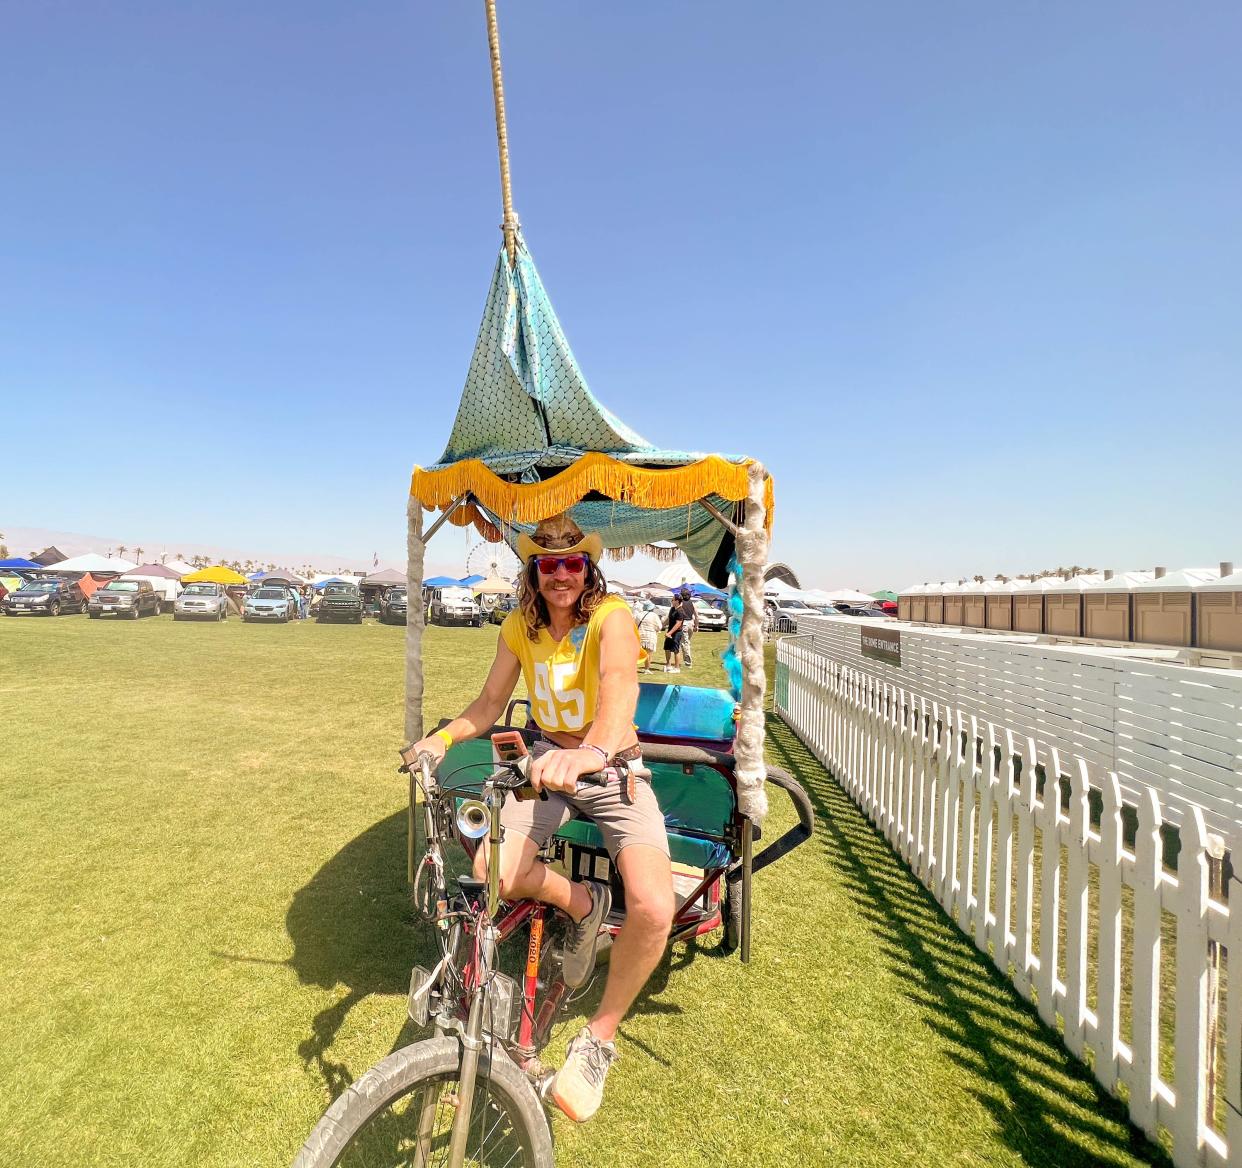 Thomas "Dukaroo" Kelley is working the Coachella Valley Arts and Musical Festival as a pedicab driver for the first time this year, in Indio, Calif., on April 14, 2023.